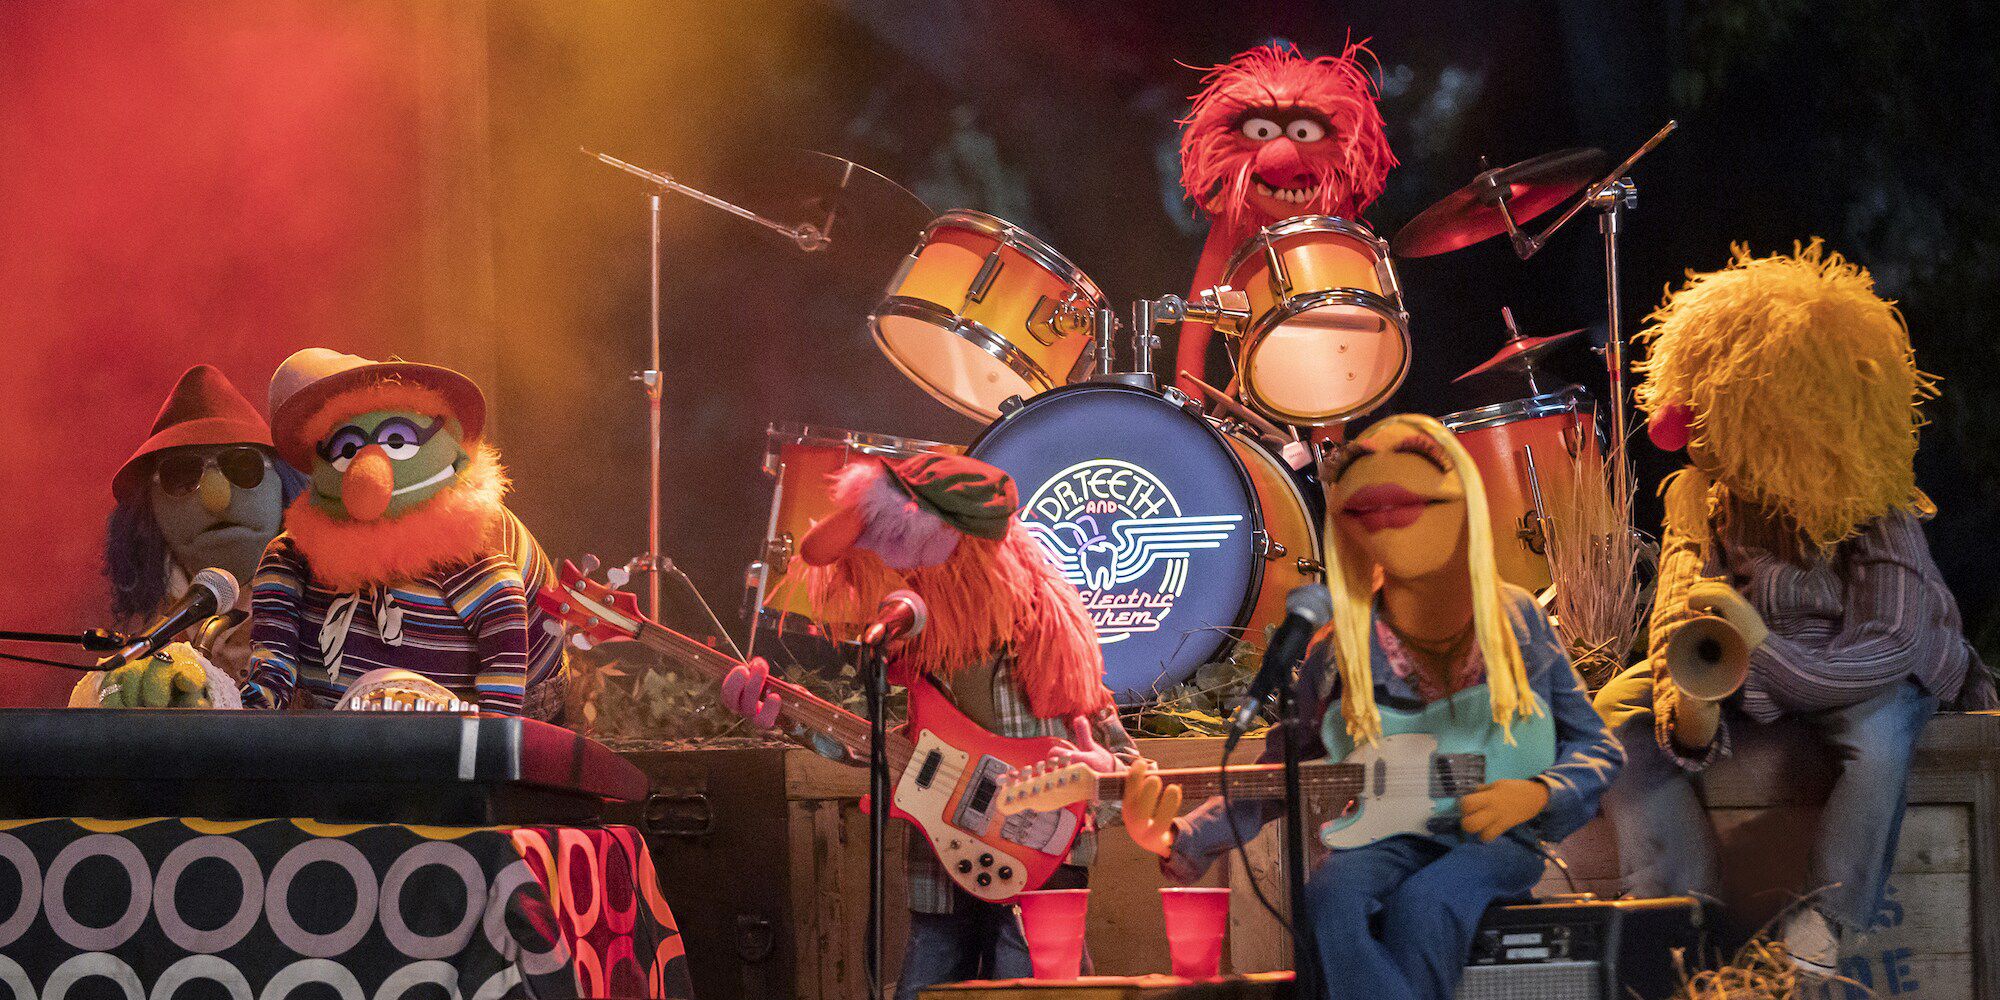 Dr. Teeth and the Electric Mayhem on stage in The Muppets Mayhem